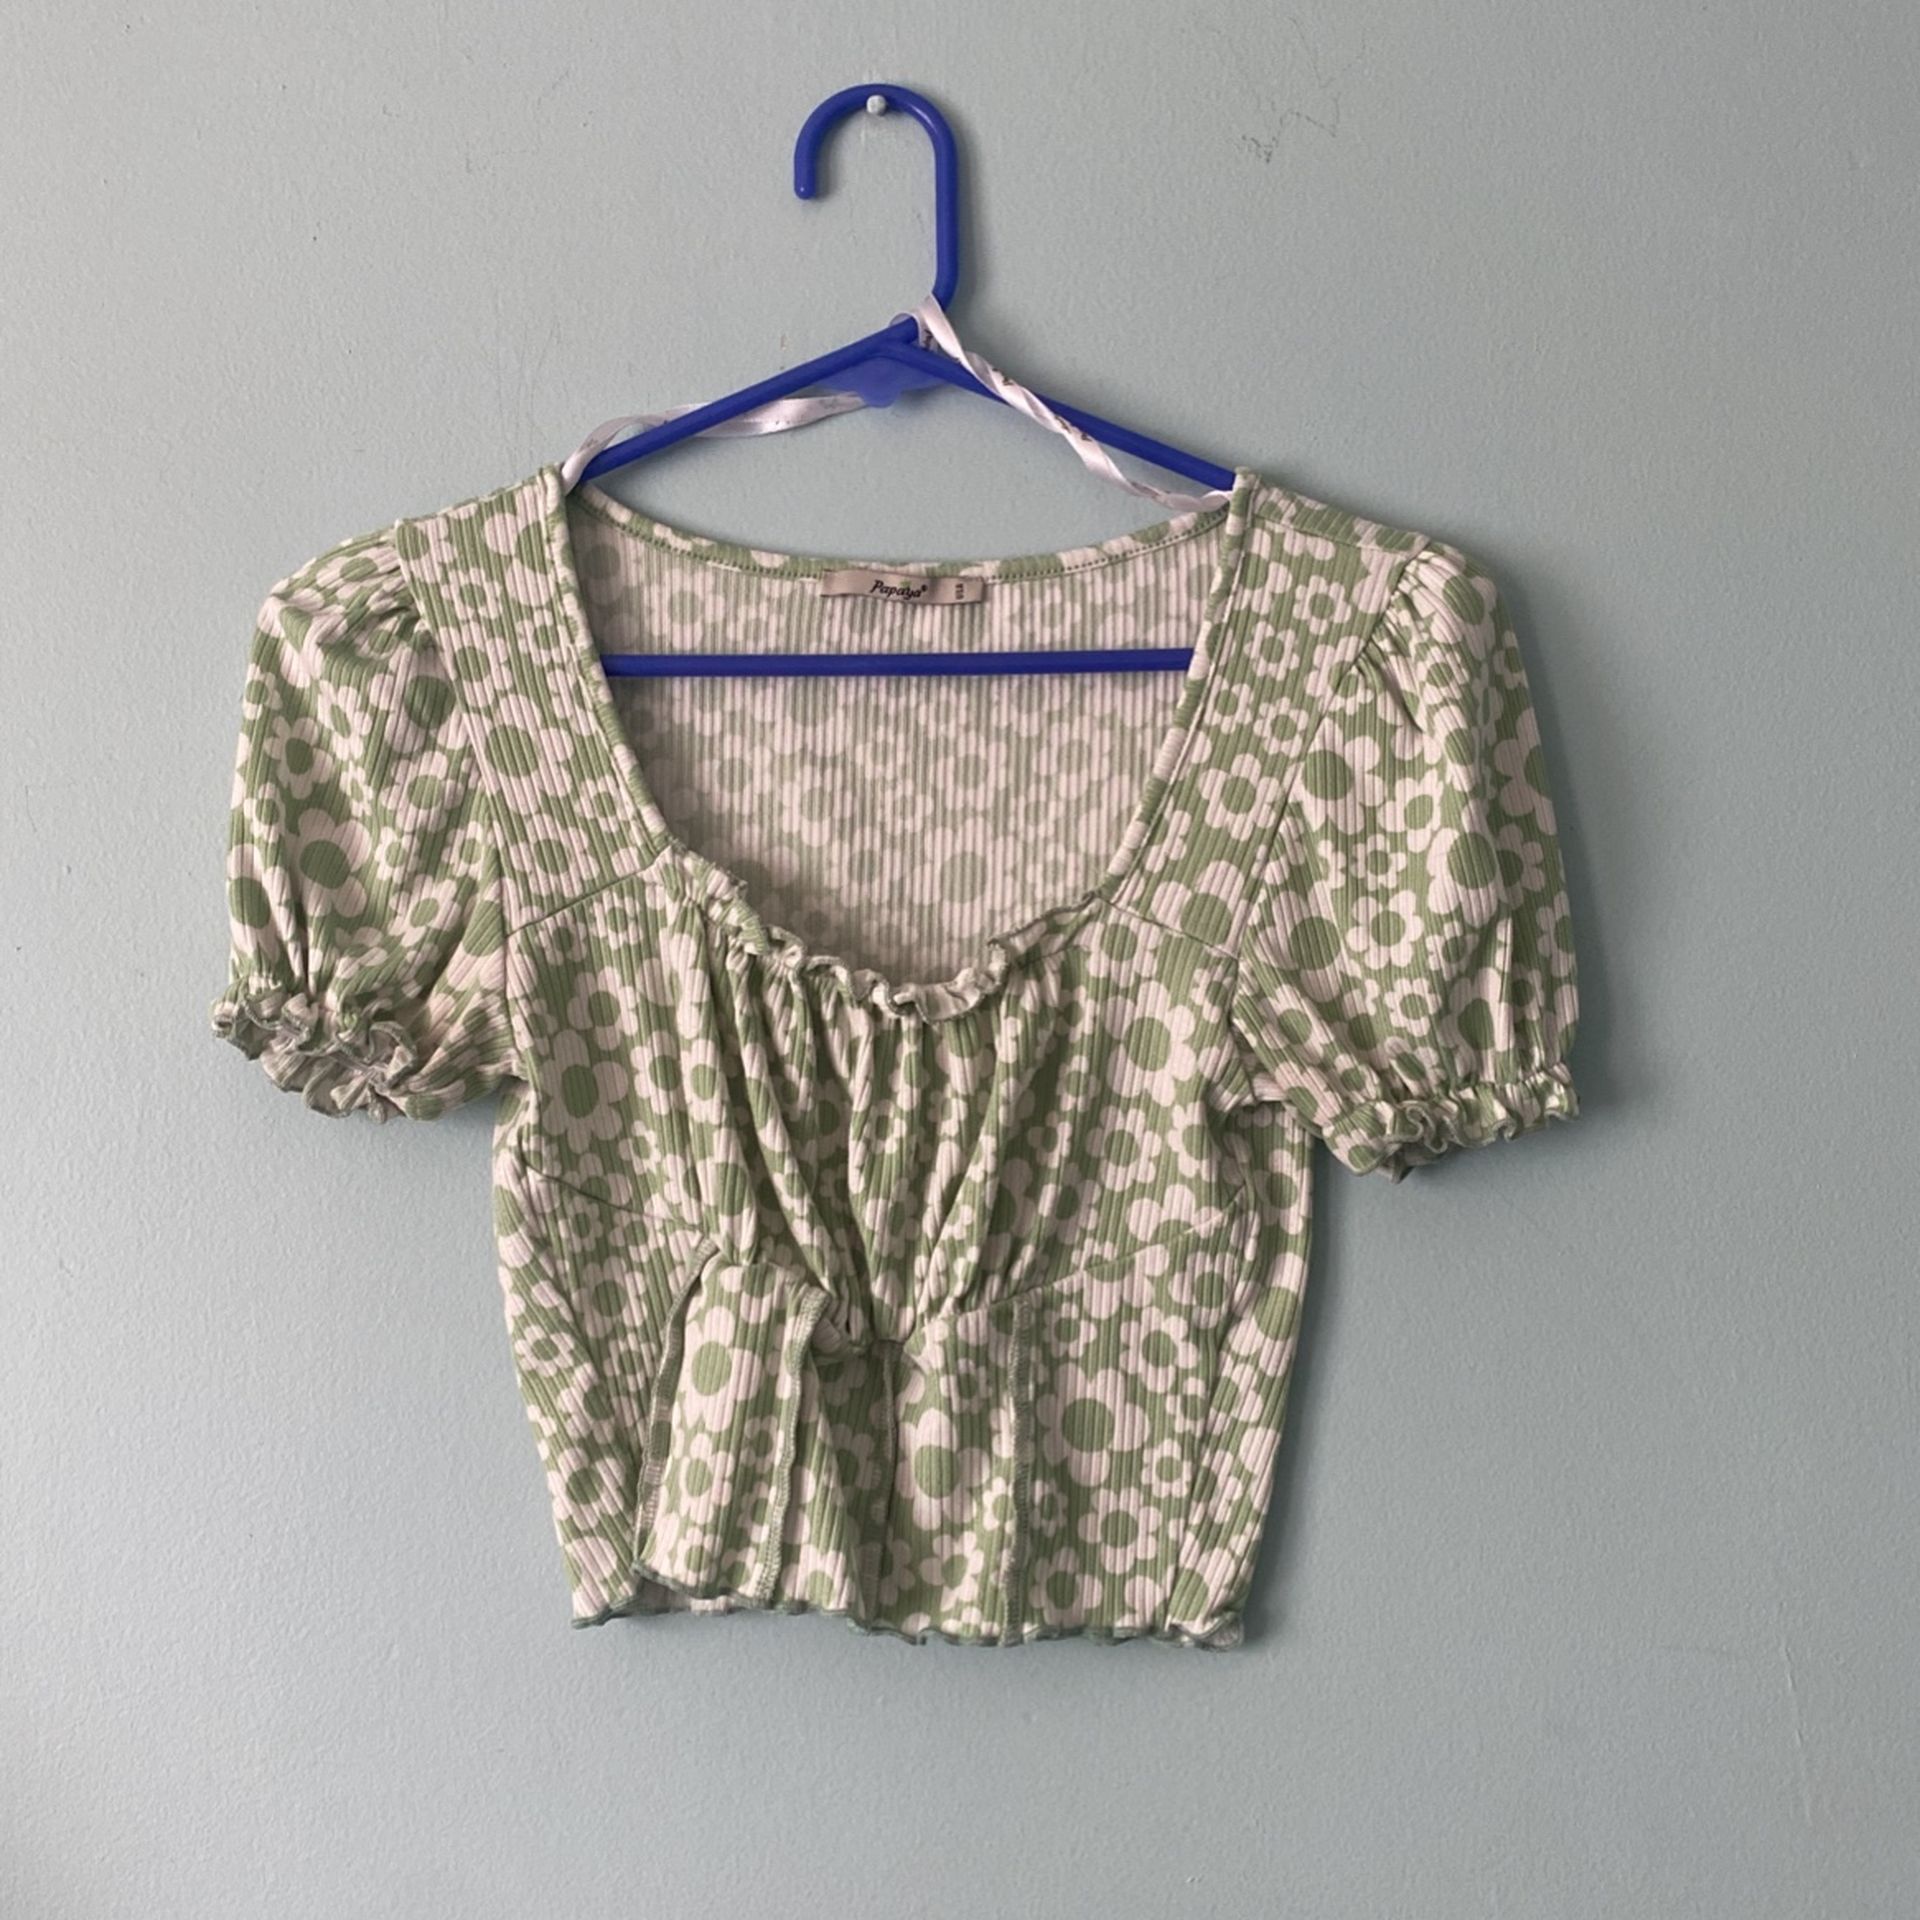 Cute Cropped Green Shirt With White Flowers